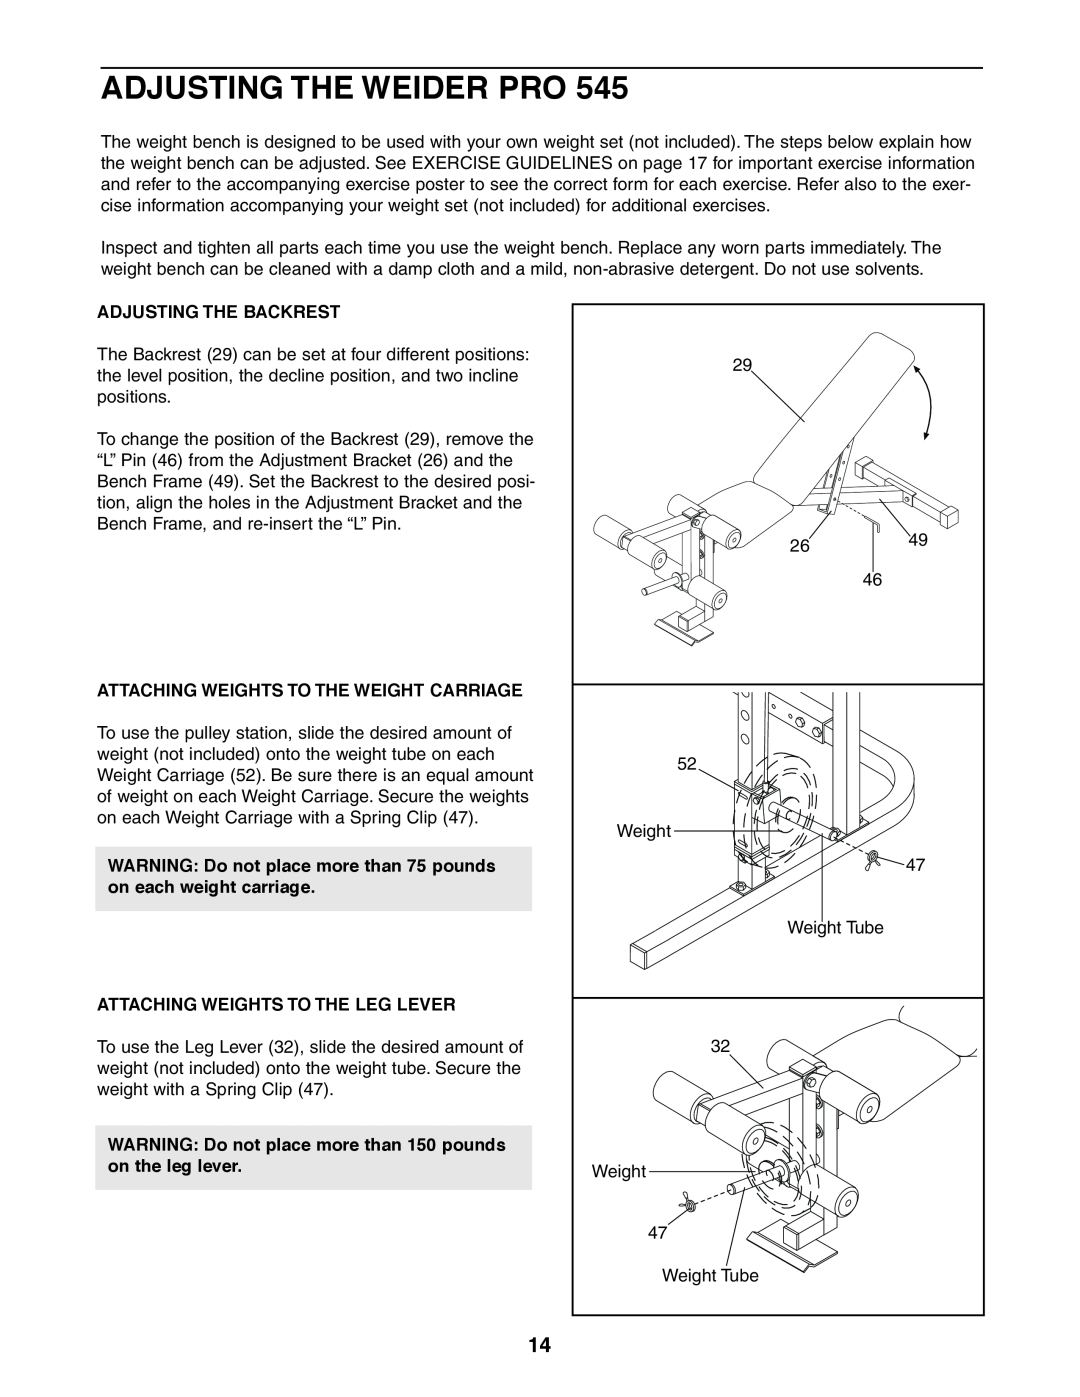 Weider 831.150470 user manual Adjusting The Weider Pro, Adjusting The Backrest, Attaching Weights To The Weight Carriage 